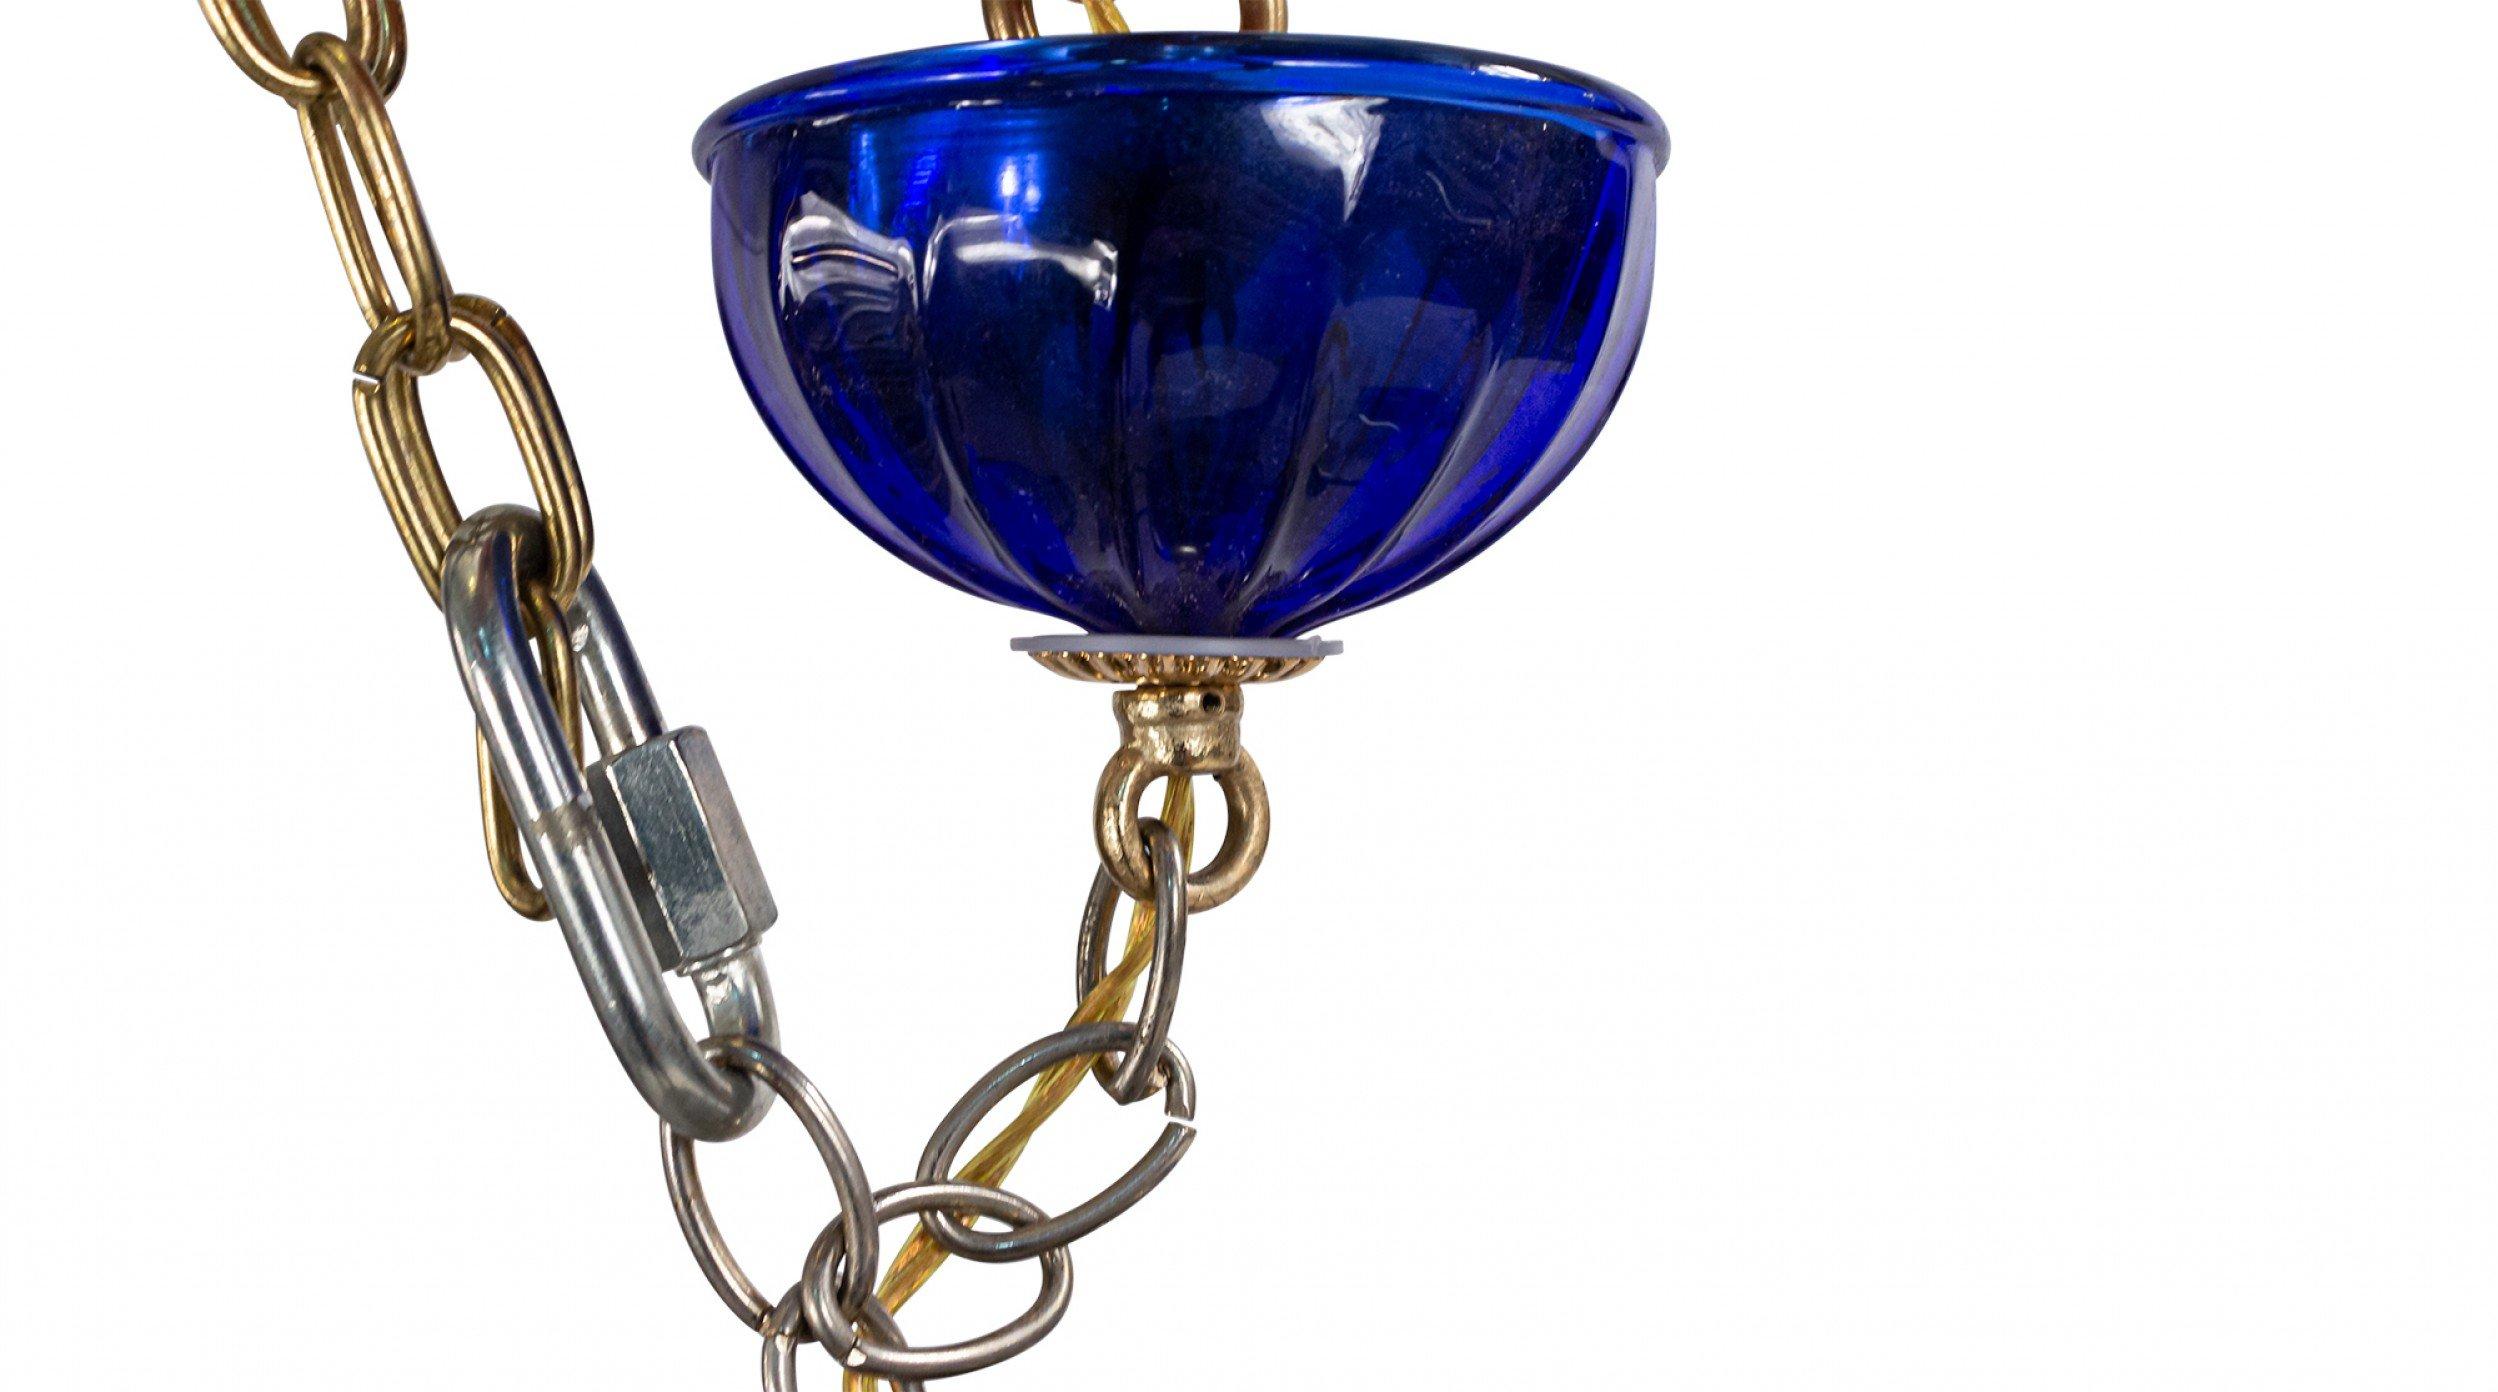 Italian Venetian Murano (Modern) blue glass chandeliers with 5 fluted scroll design arms and circular shades emanating from a segmented stem with a ball finial bottom (similar 6 arm: )VTP1620).
      